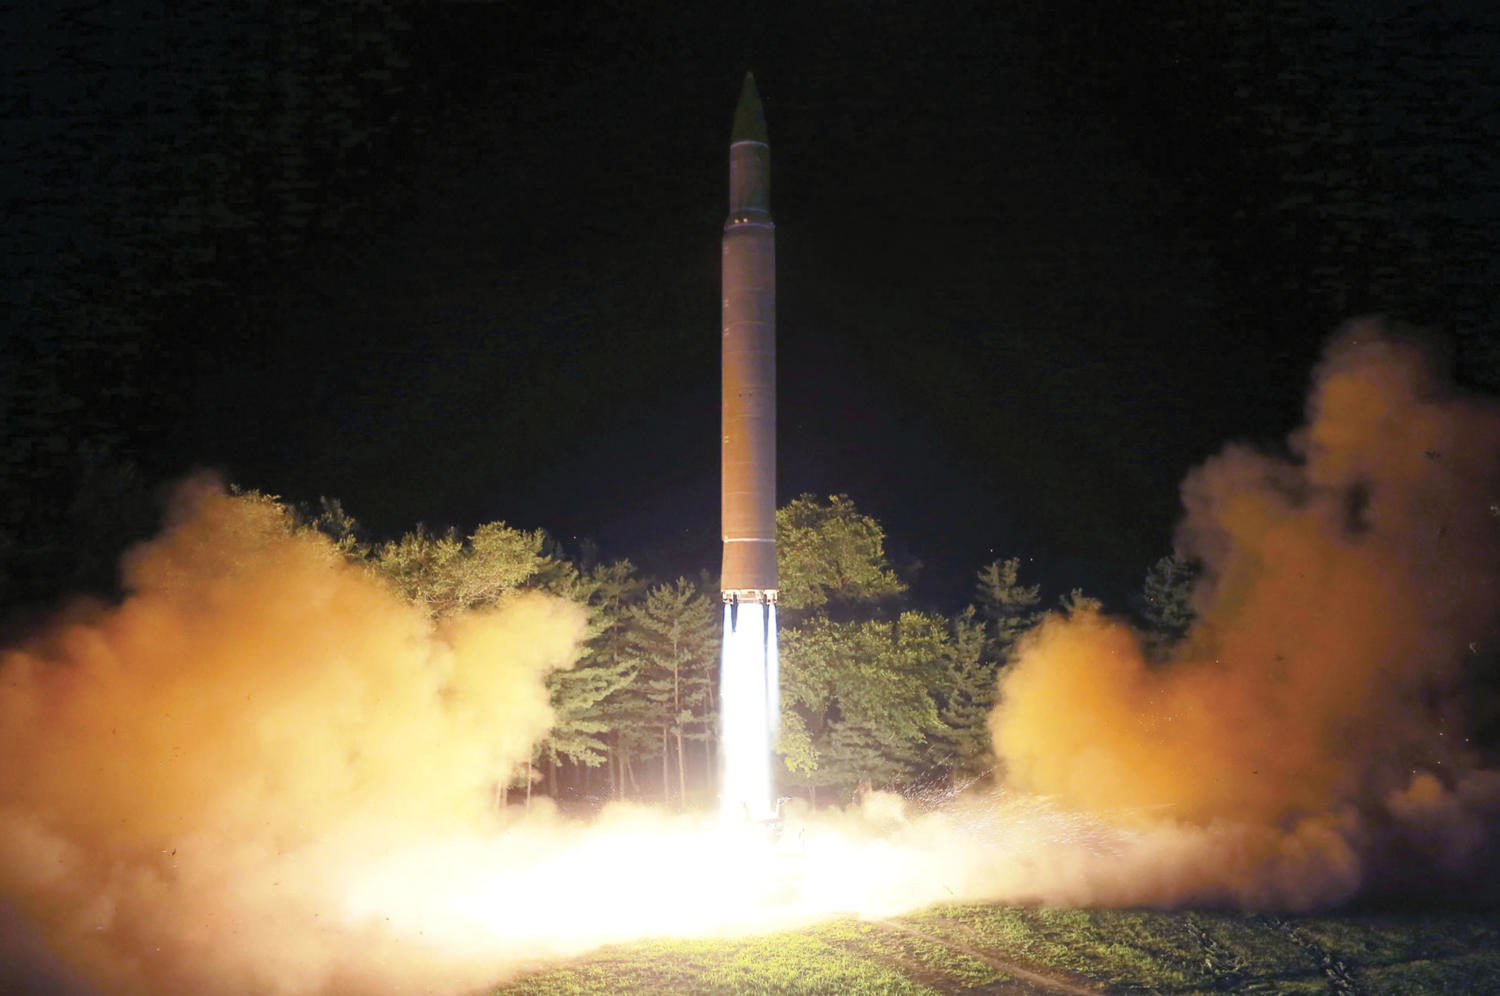 FILE - This July 28, 2017, file photo distributed by the North Korean government shows what was said to be the launch of a Hwasong-14 intercontinental ballistic missile at an undisclosed location in North Korea. America’s annual joint military exercises with South Korea always frustrate North Korea. Some experts say North Korea is mainly focused on the bigger picture of testing its bargaining power against the United States with its new long-range missiles and likely has no interest in letting things get too tense during the drills. (Korean Central News Agency/Korea News Service via AP, File)